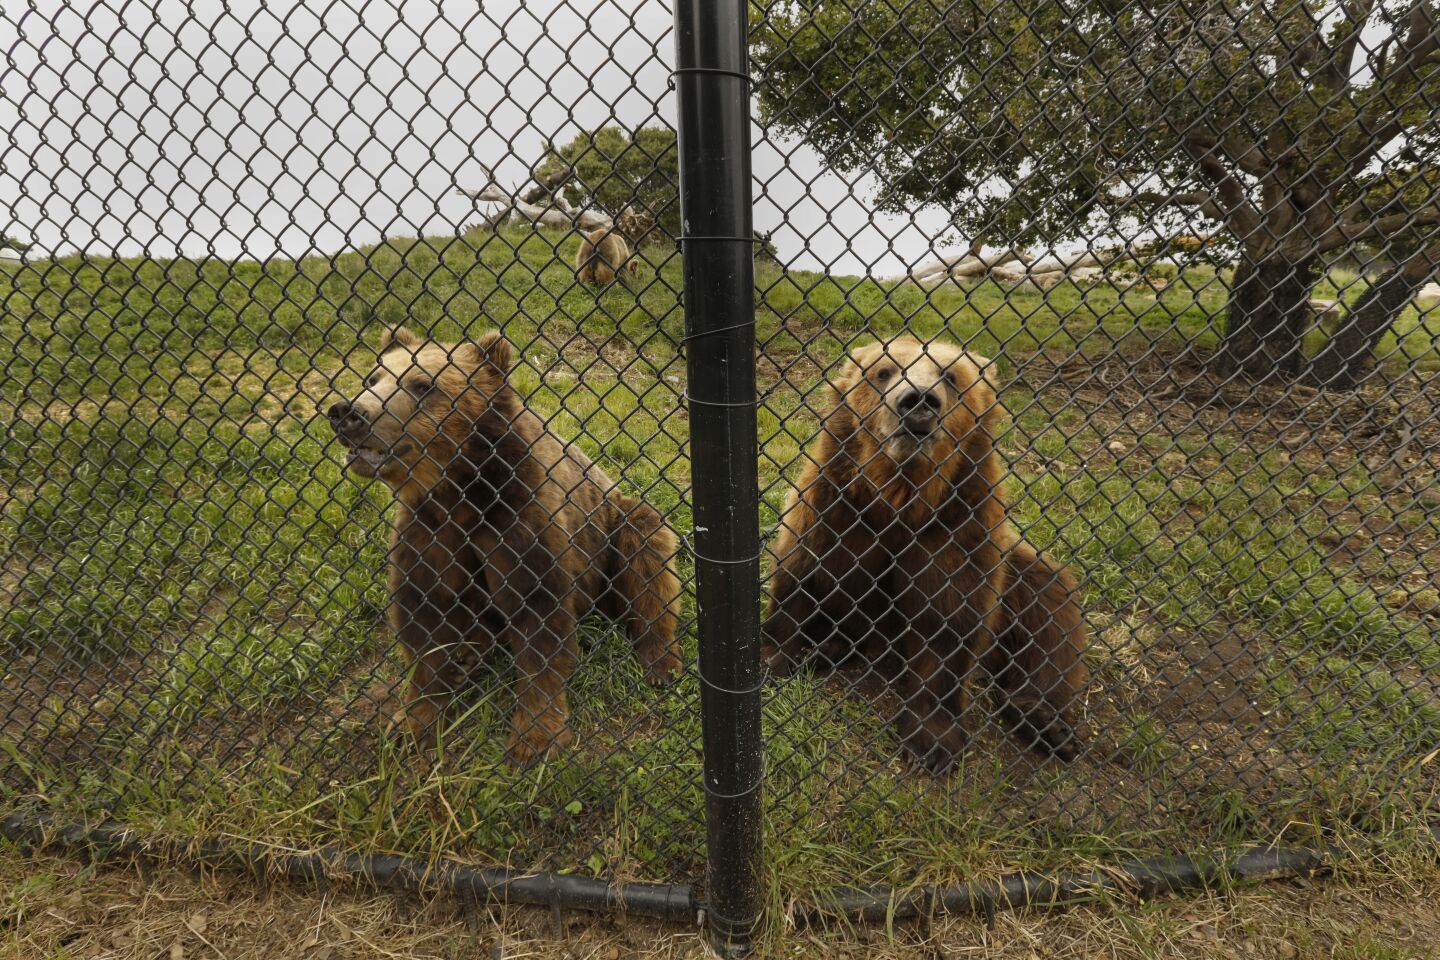 Two grizzly bears rescued from Alaska wait for fruit treats deliver by a slingshot from zoo keeper, Leslie Storer. The Oakland Zoo is closed due to the coronavirus, leaving the zoo without ticket sales. The costs of operating the zoo is 2 million dollars per month.